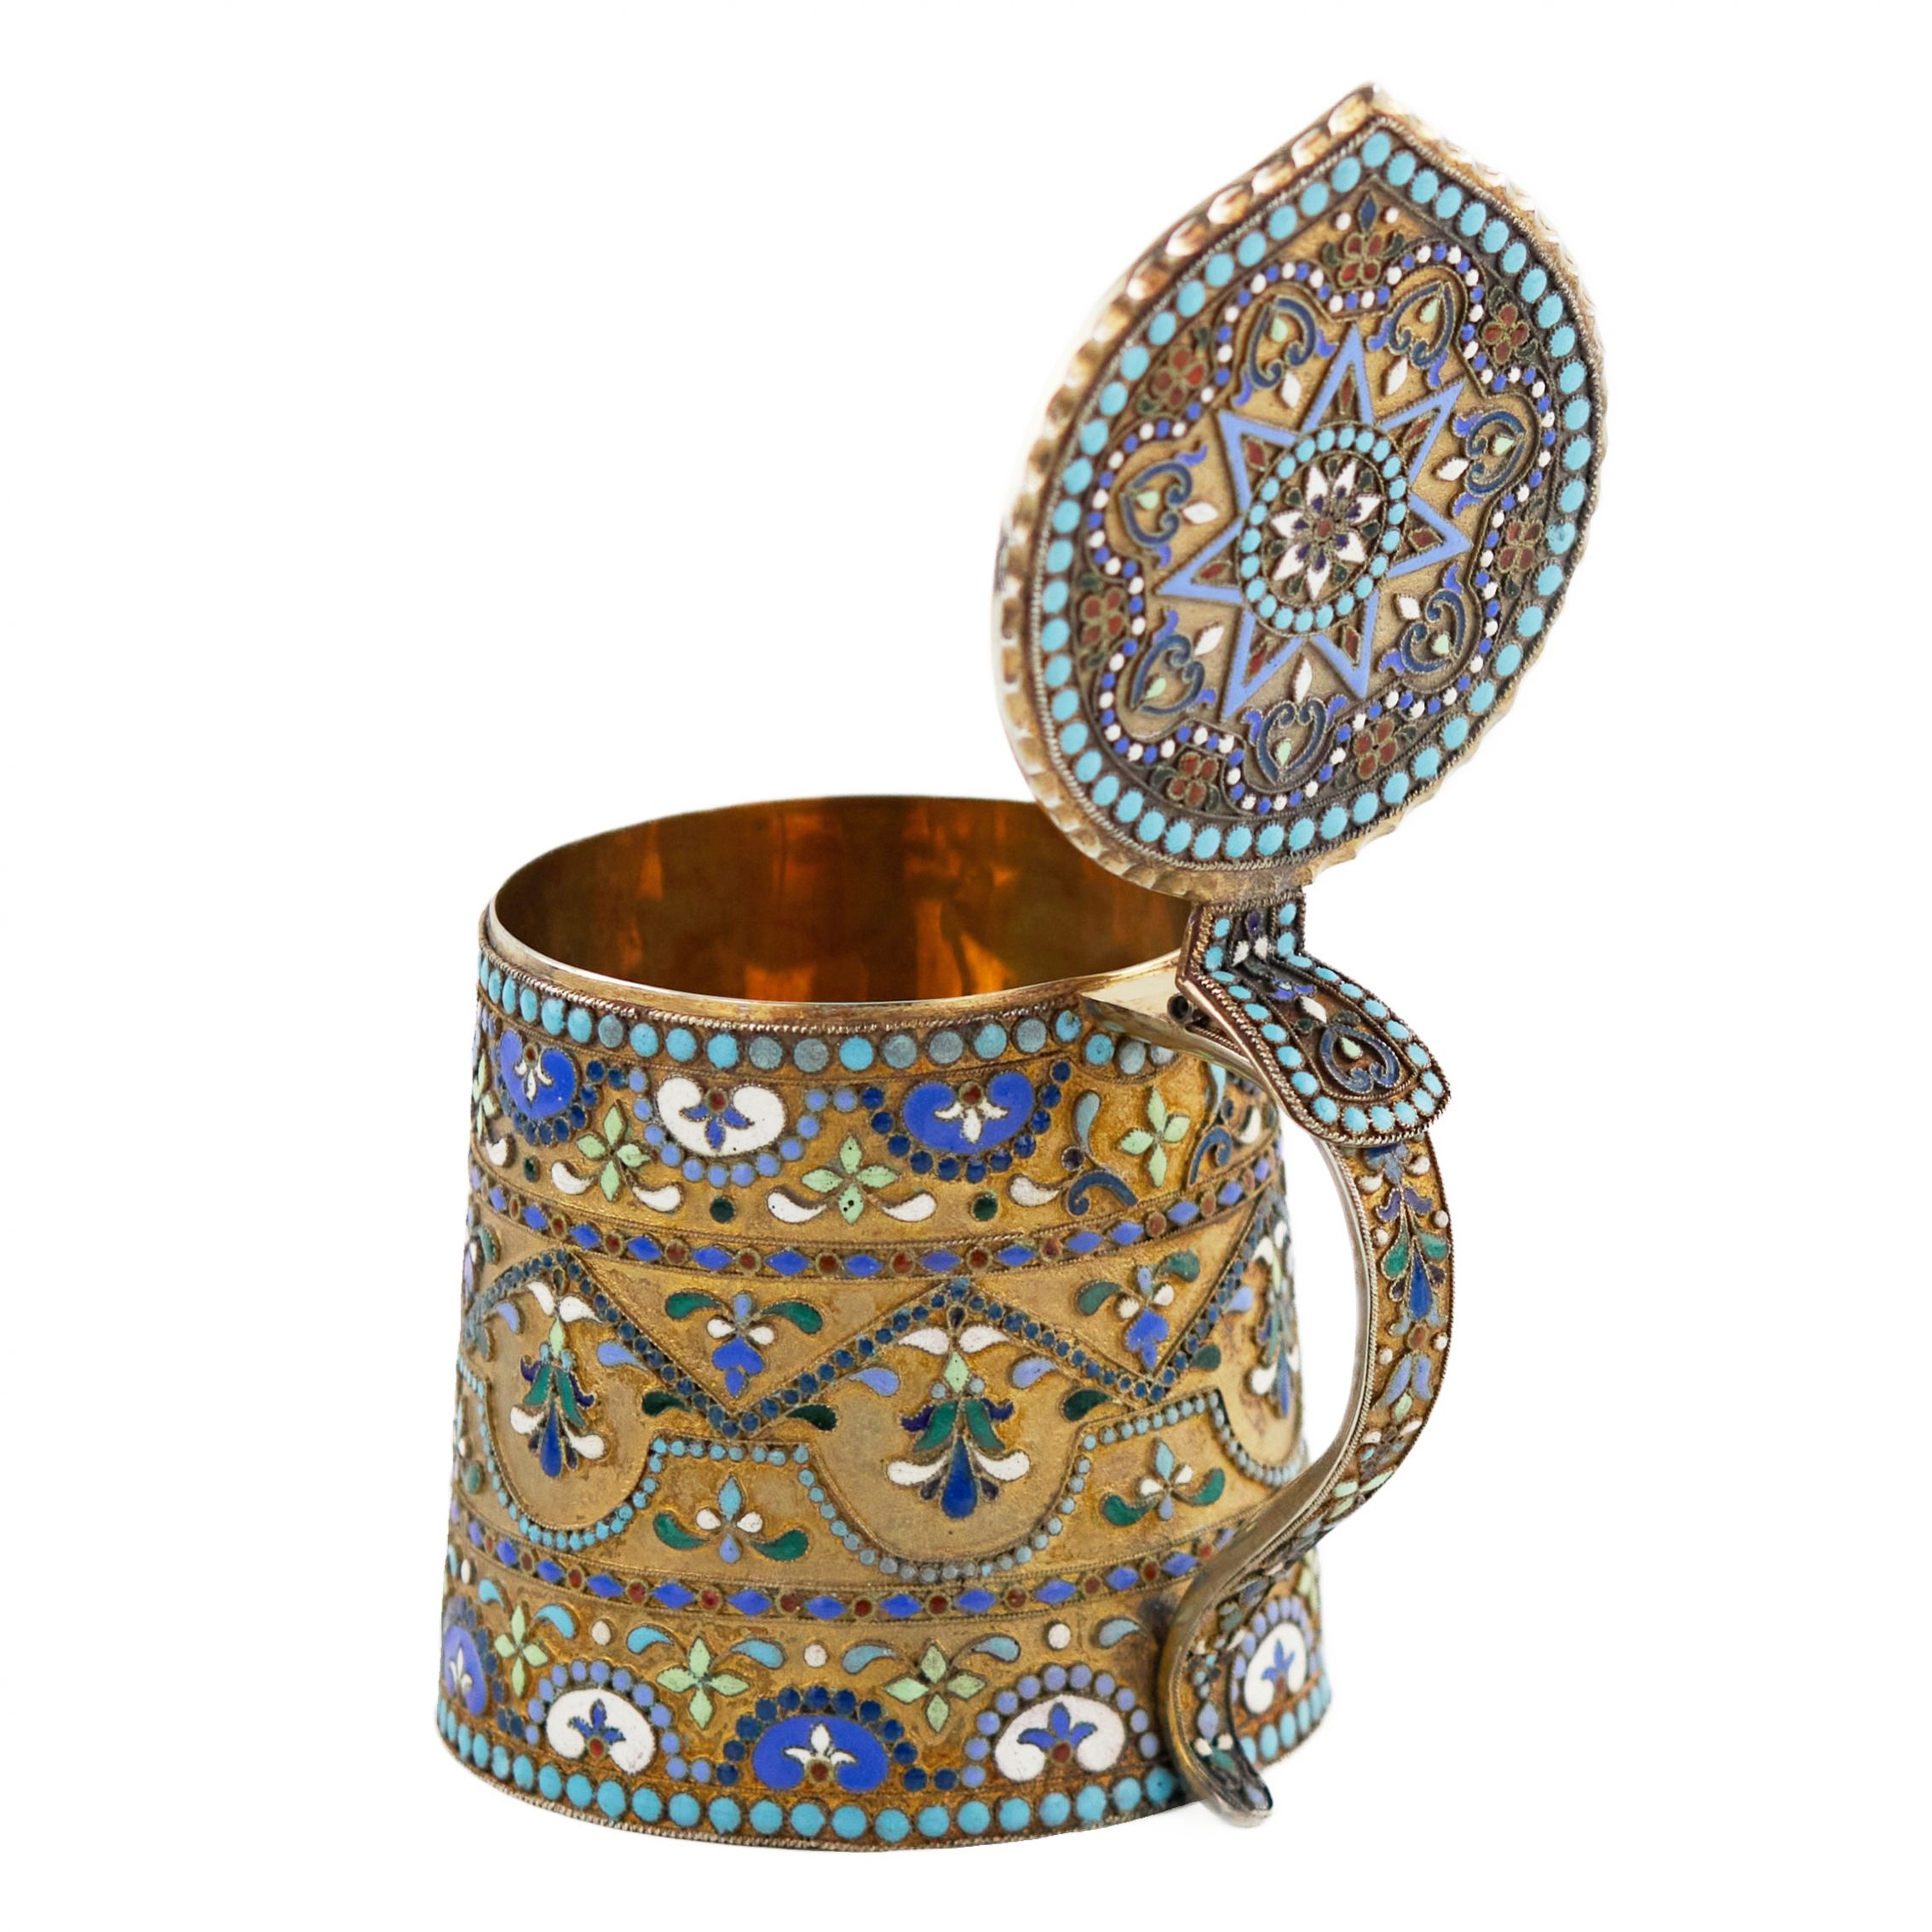 Russian, silver cloisonne enamel mug in neo-Russian style. 20th century. - Image 4 of 8